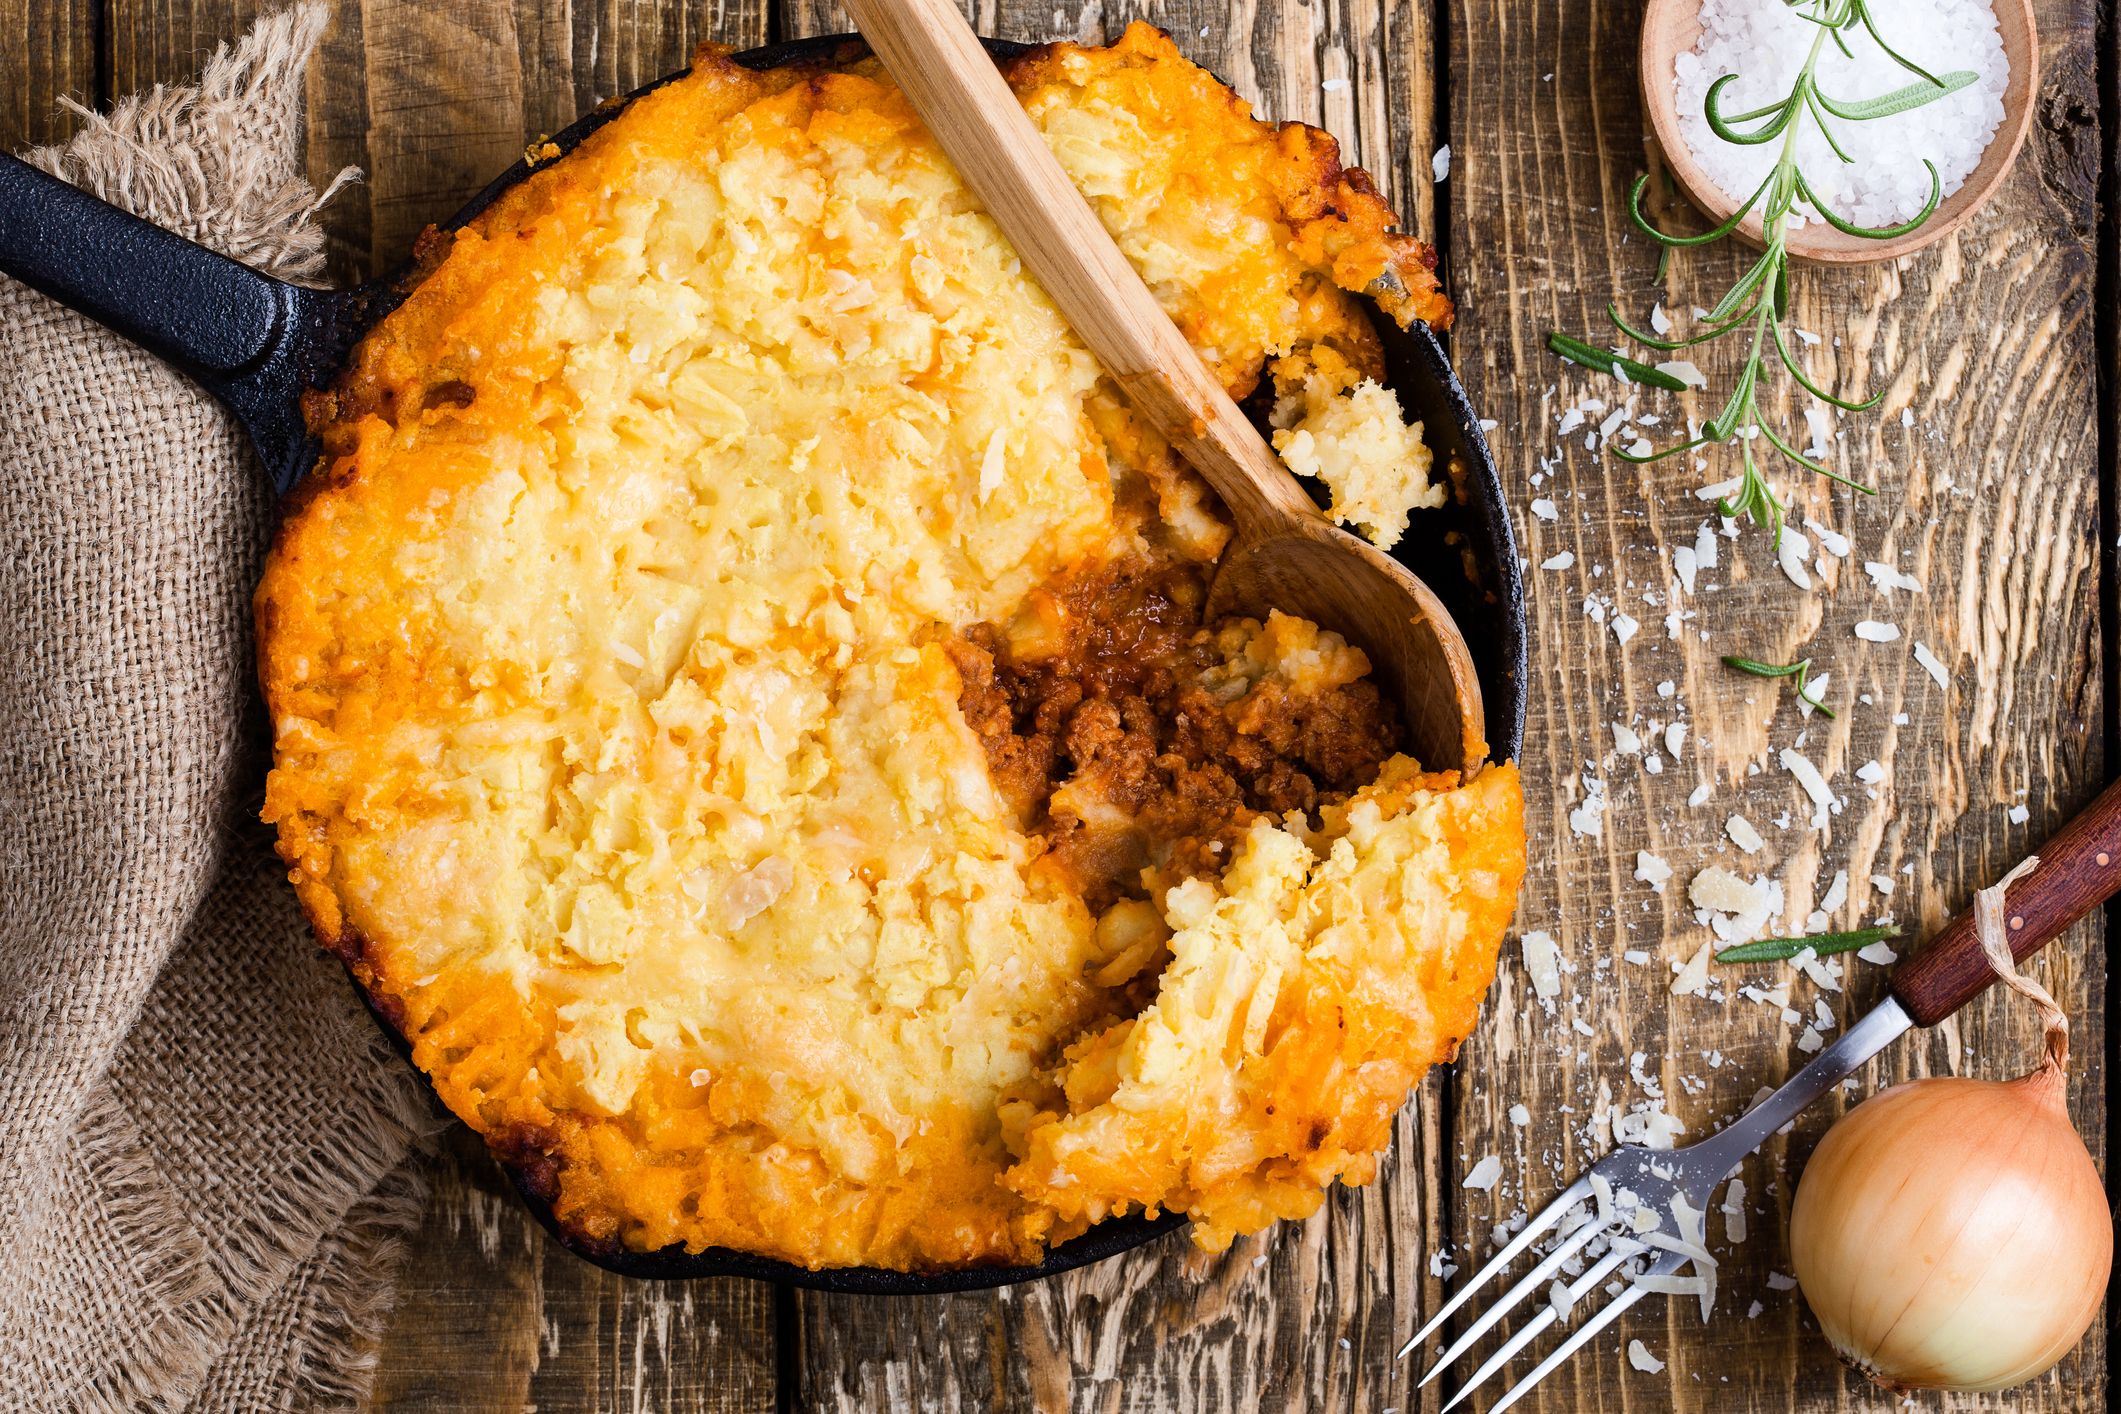 https://hips.hearstapps.com/hmg-prod/images/traditional-british-dishes-shepherds-pie-royalty-free-image-1683578962.jpg